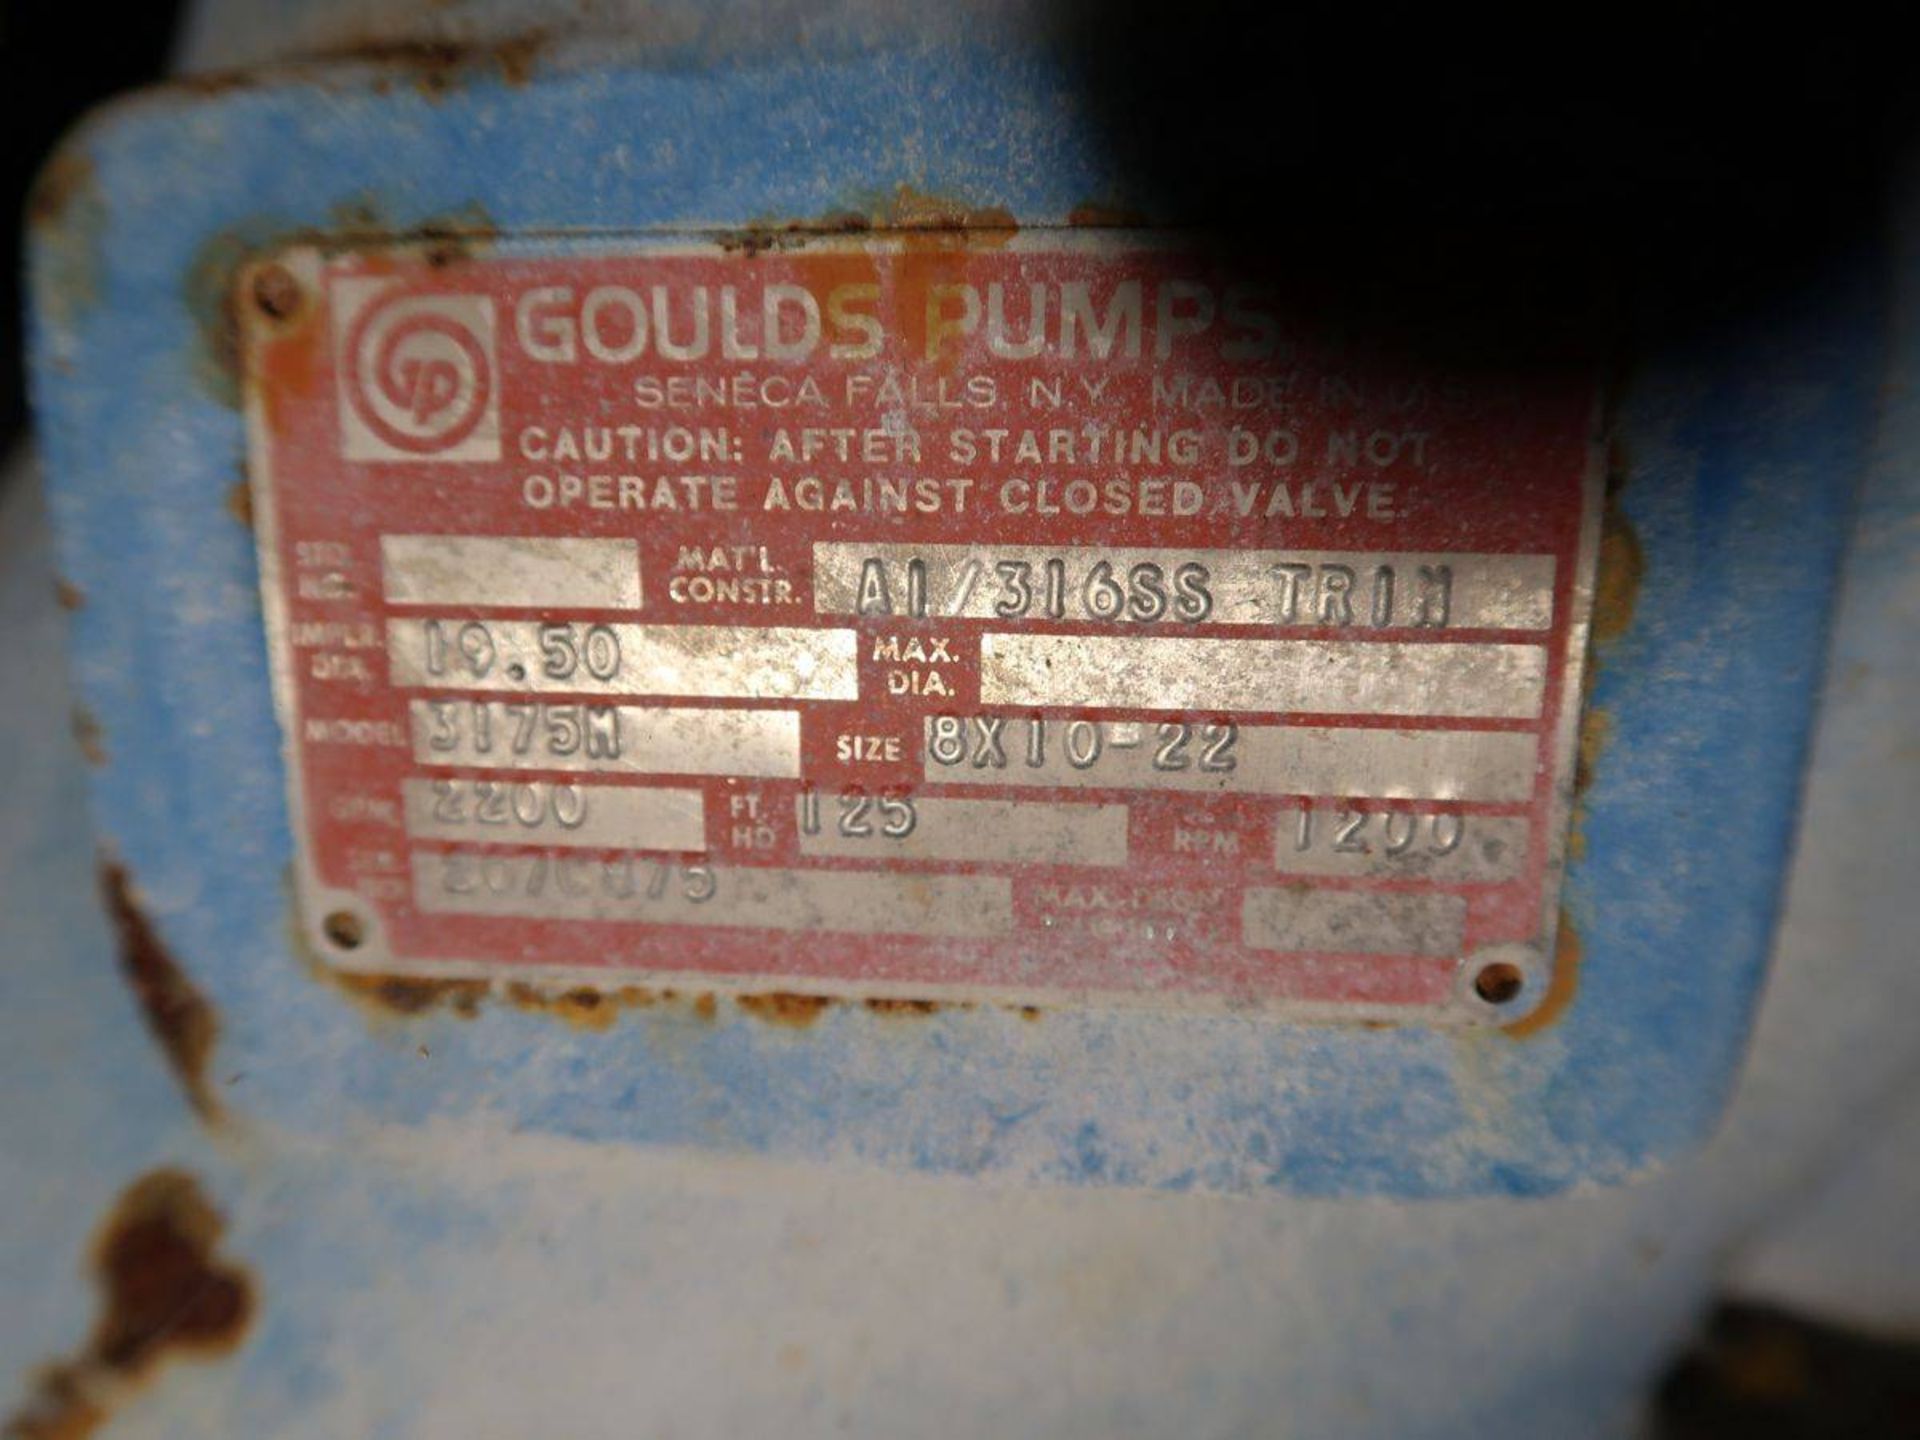 Goulds 3175LT 8 x 10-22 Uniflow Cleaner Feed Centrifugal Pump - Image 3 of 4